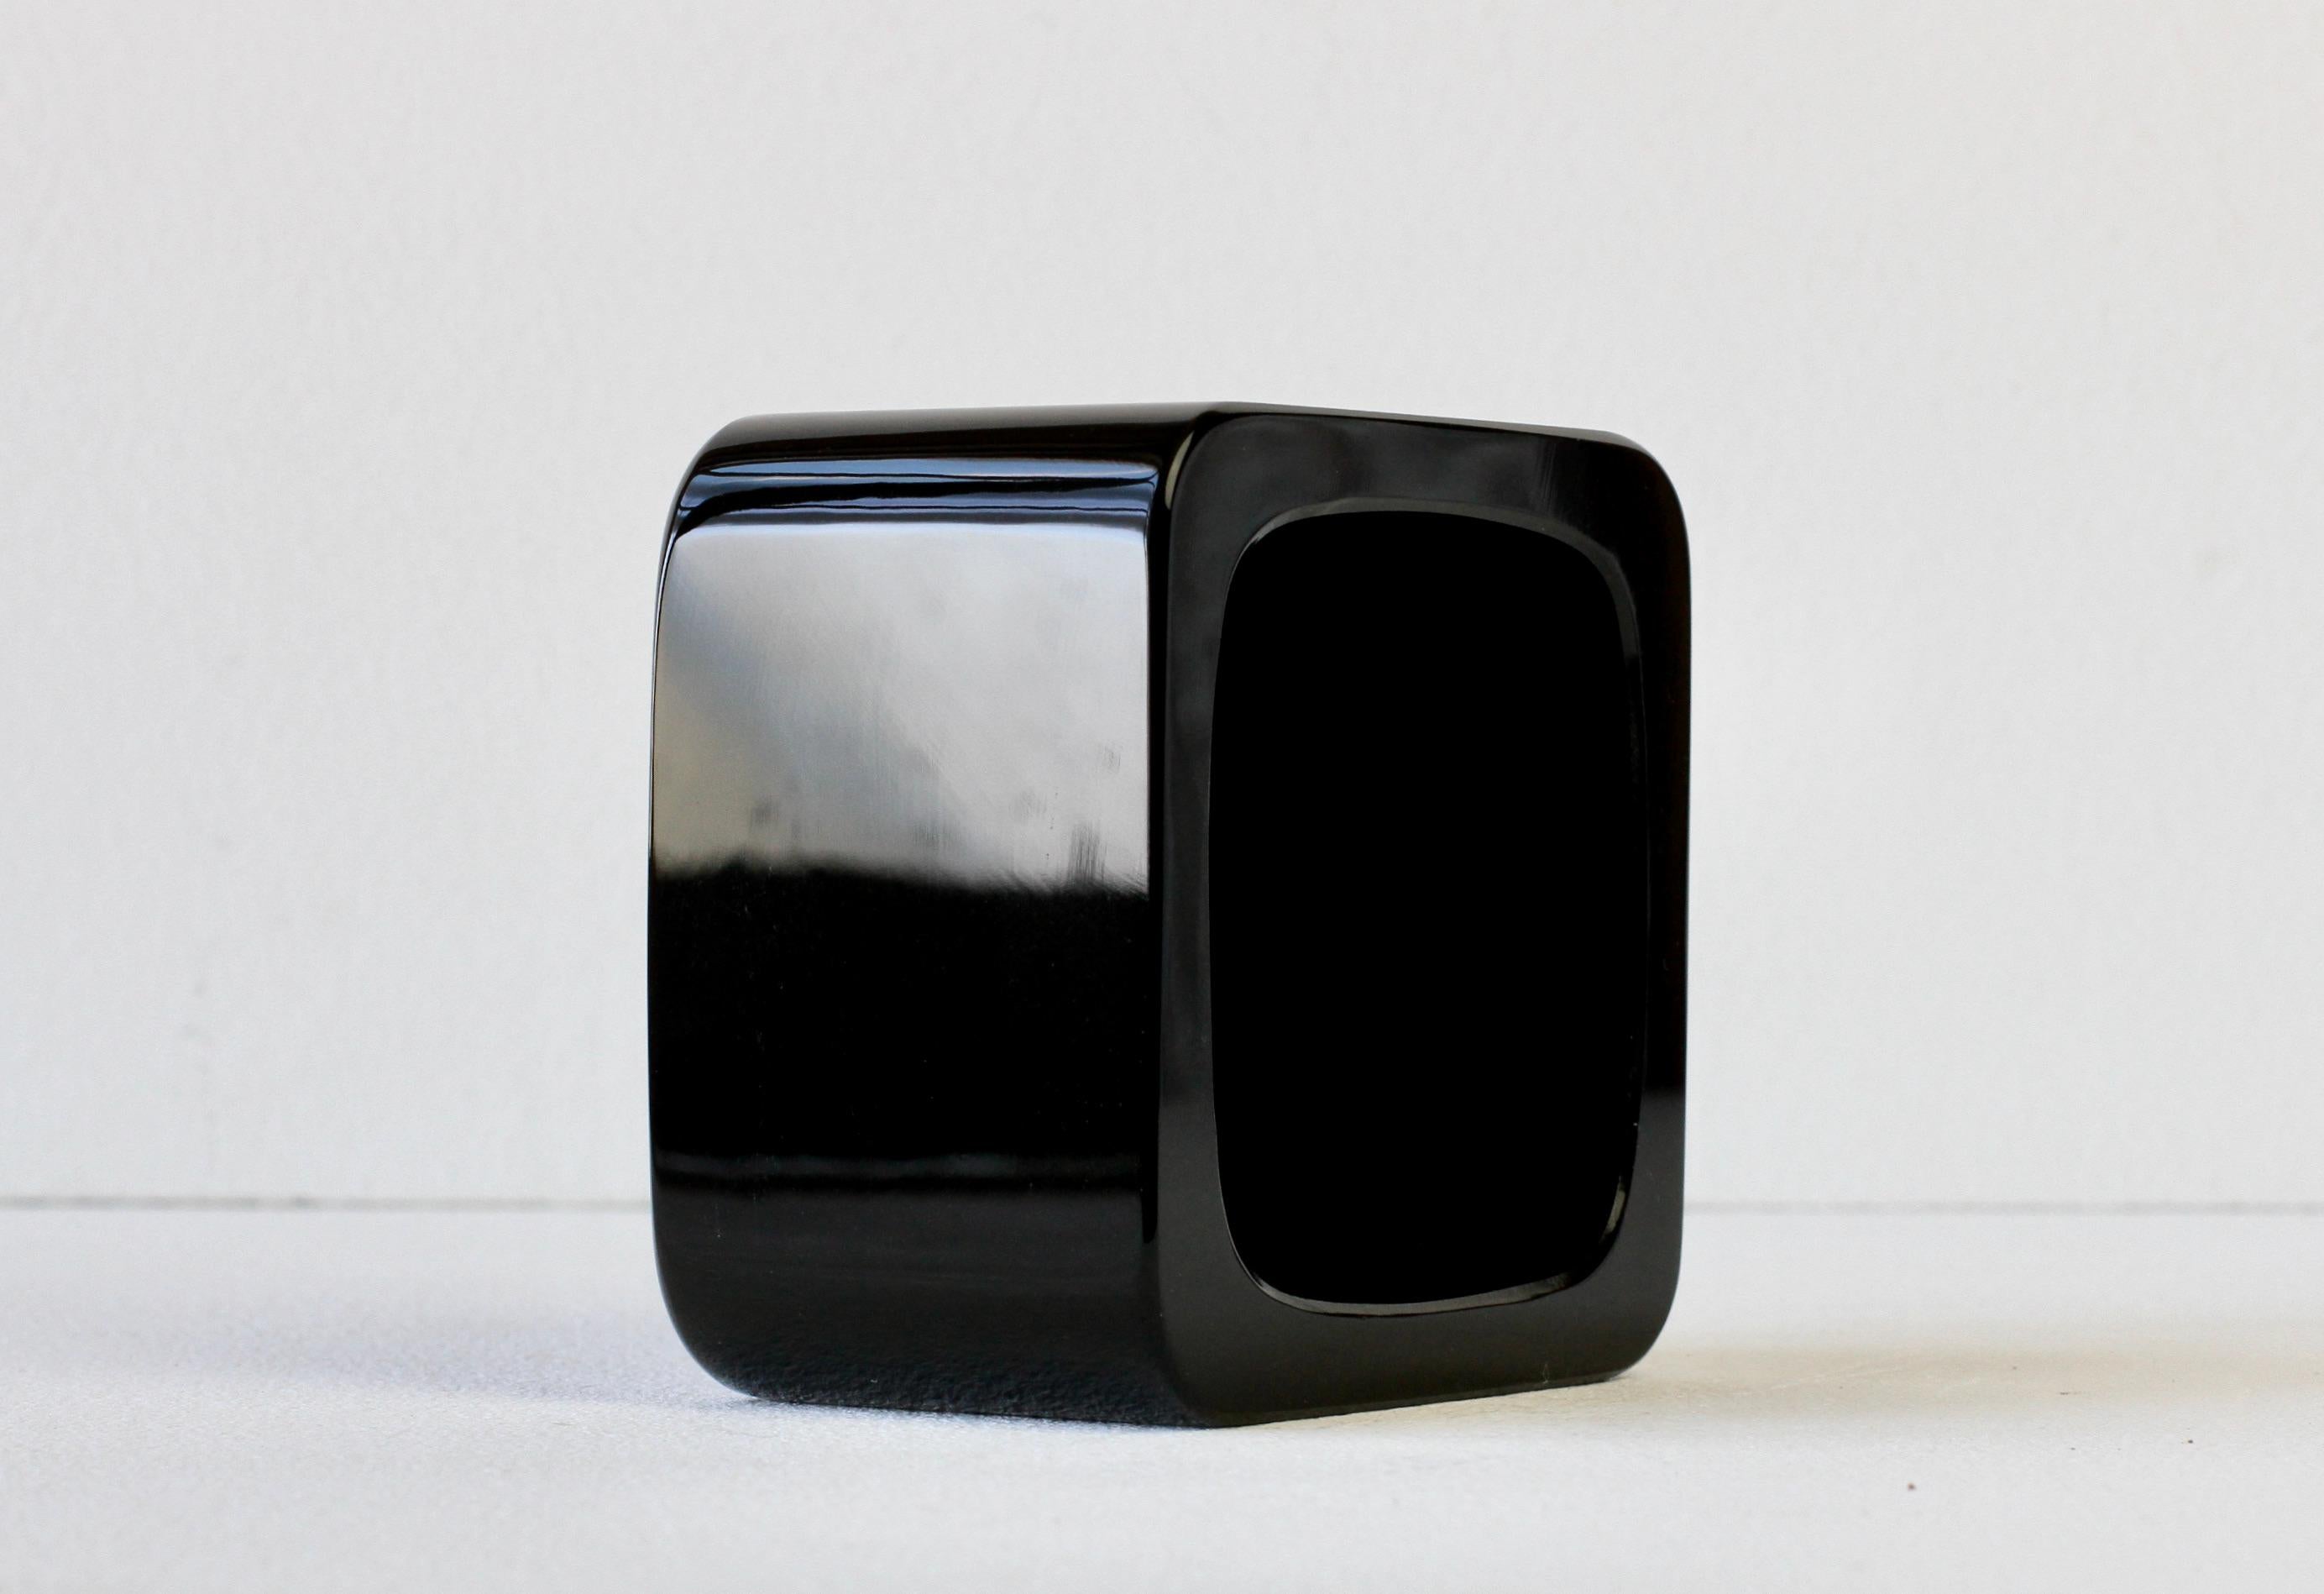 Petite Karl Springer style black colored / coloured square vintage mid-century modern Murano glass bowl, dish or ashtray by Seguso Vetri d'Arte Murano, Italy circa 1980s. Elegant and simplistic in form. Black is a particularly difficult colour to